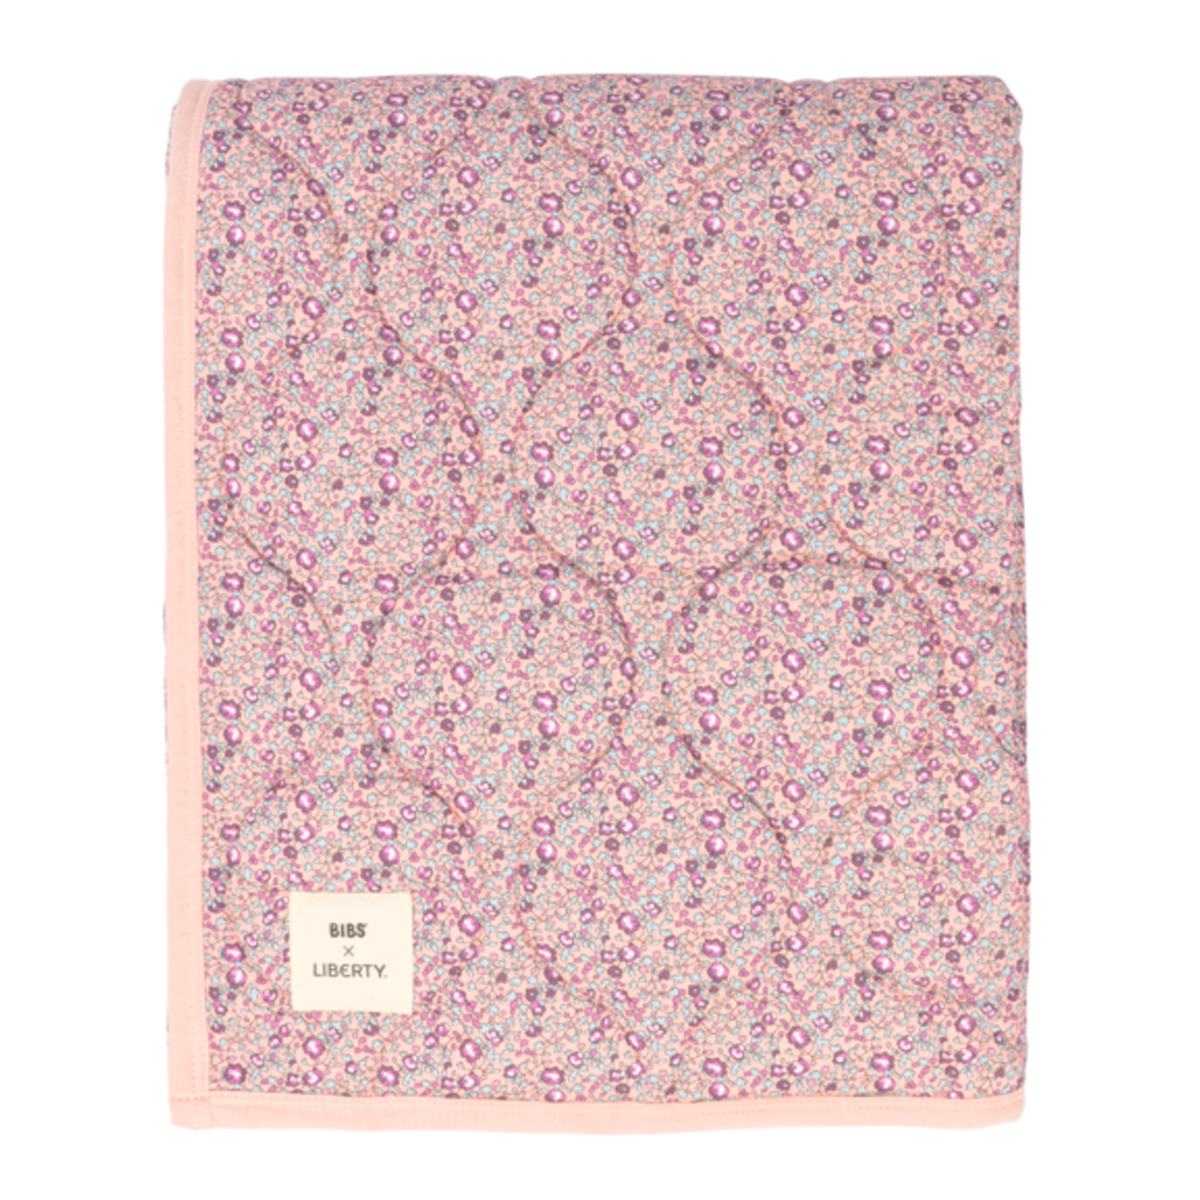 BIBS Play - Quilted Legetæppe - Eloise/Blush